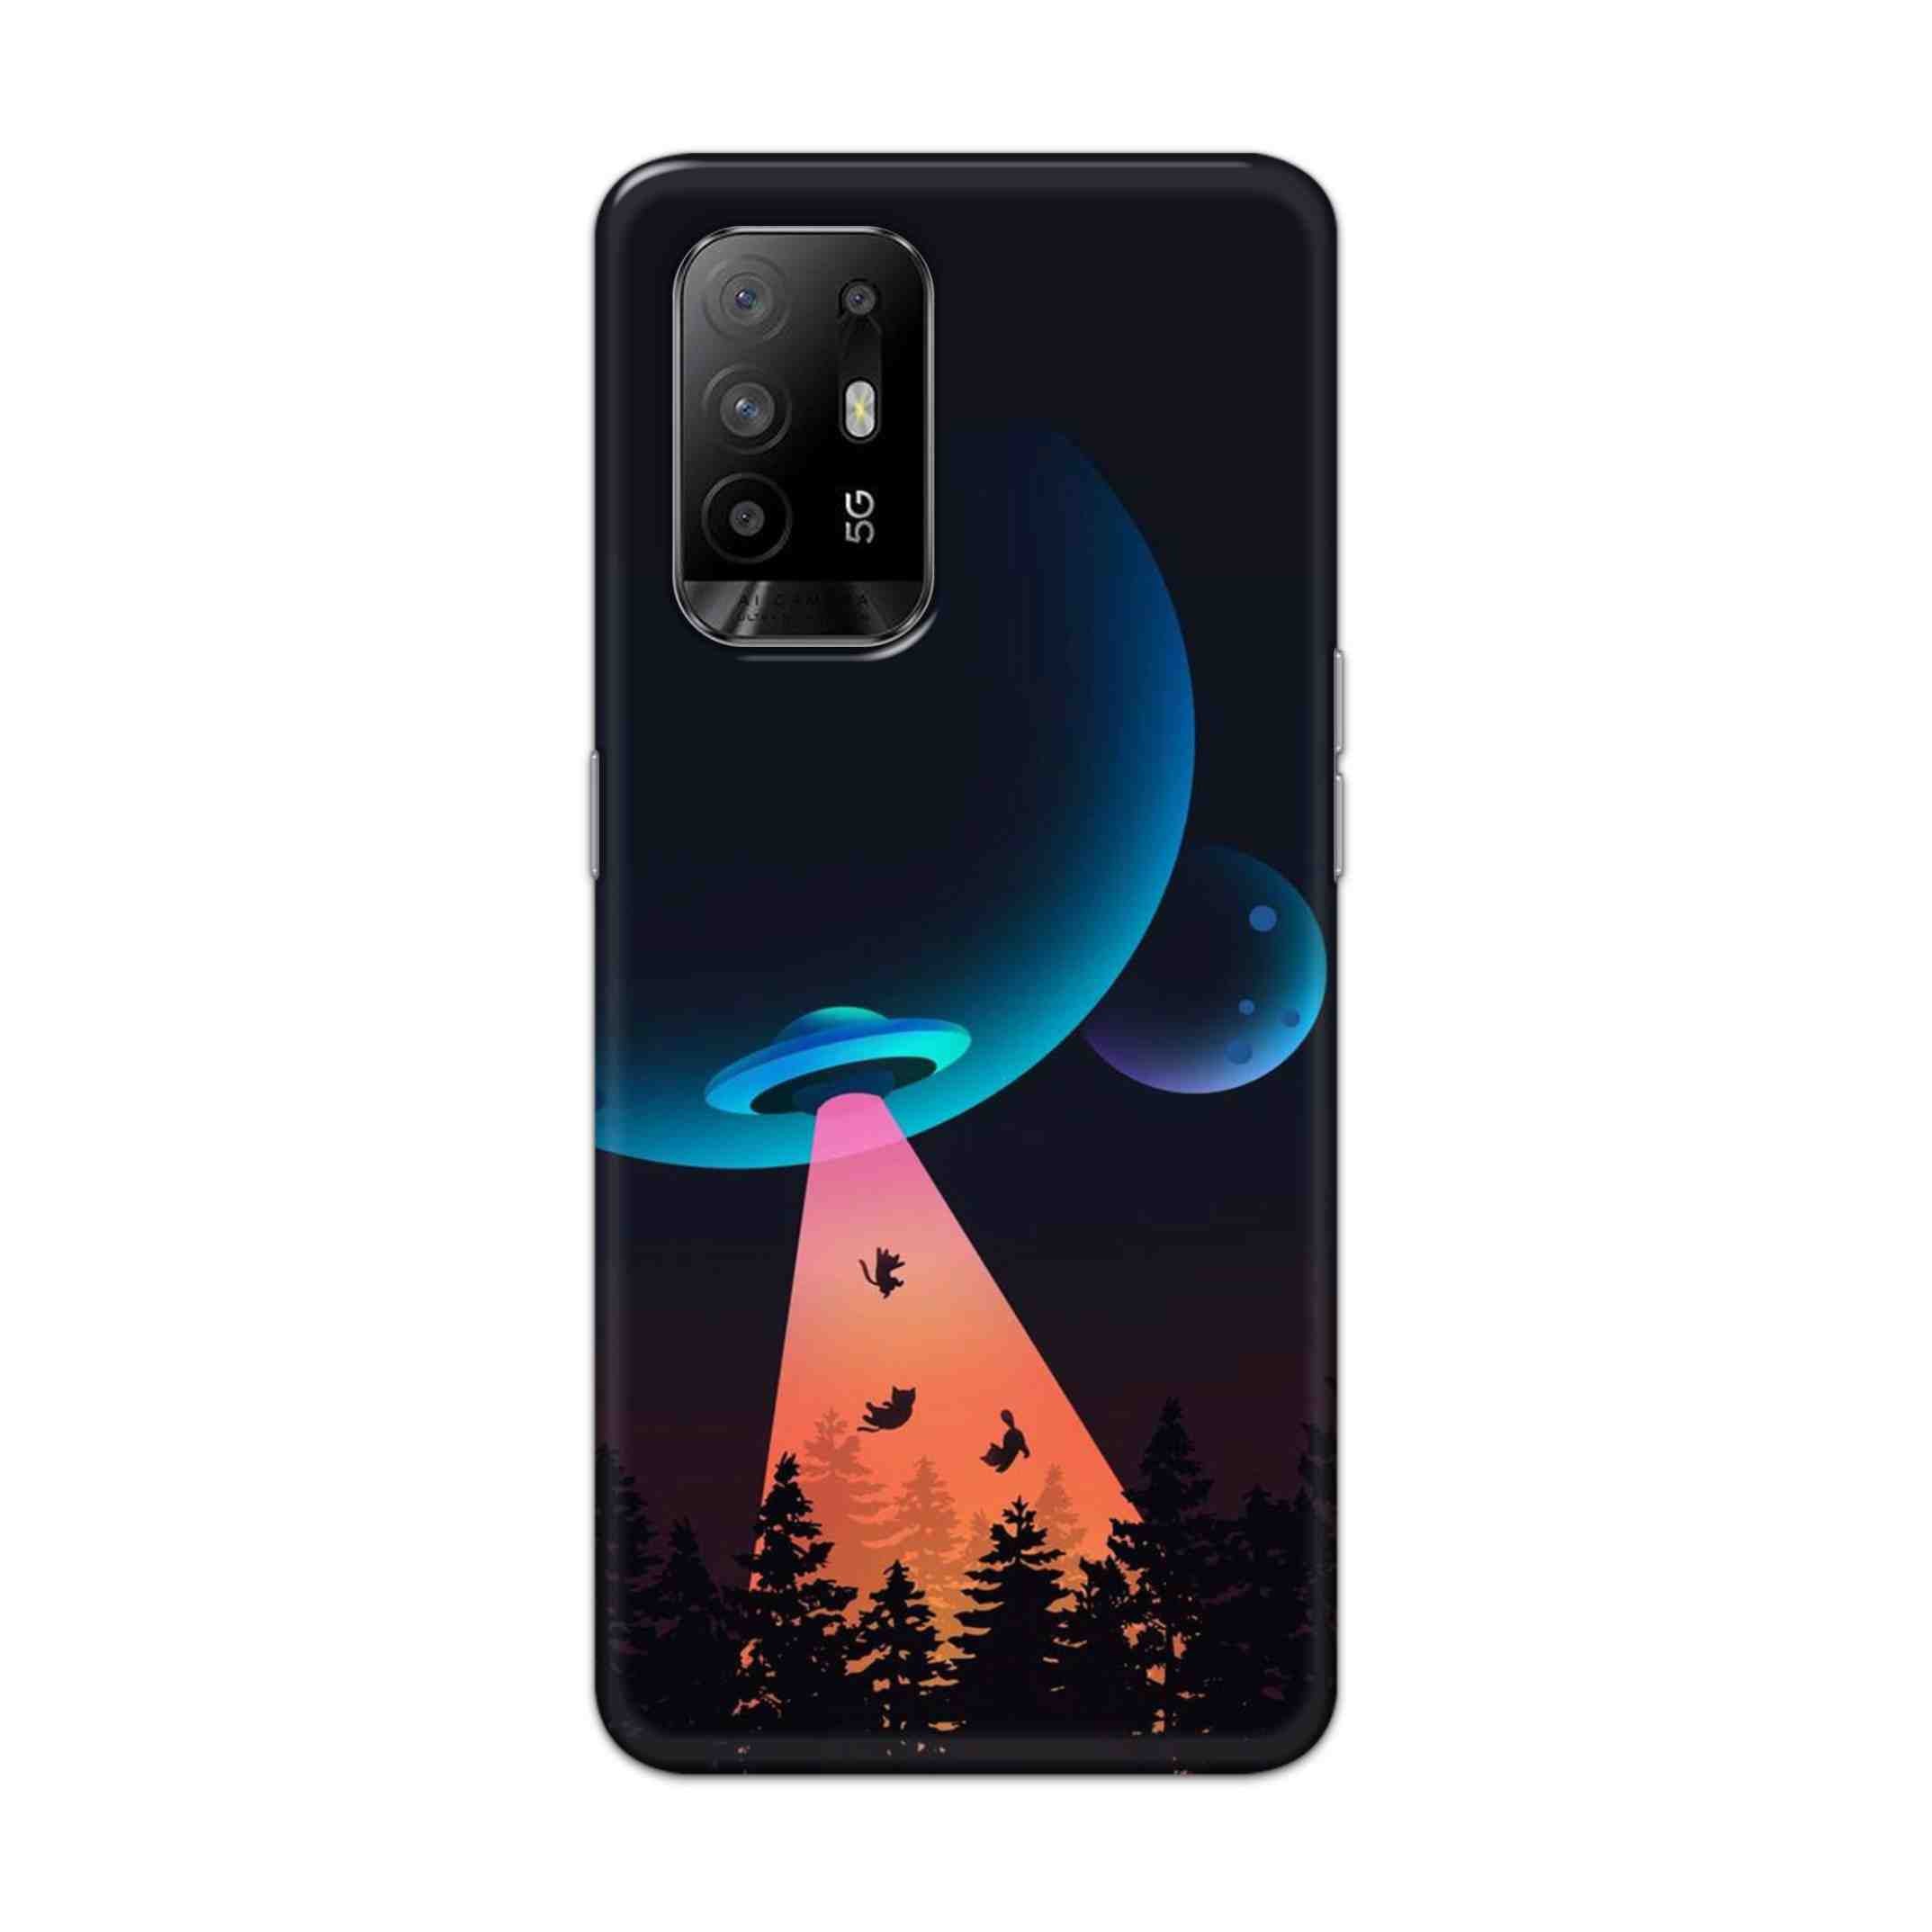 Buy Spaceship Hard Back Mobile Phone Case Cover For Oppo F19 Pro Plus Online